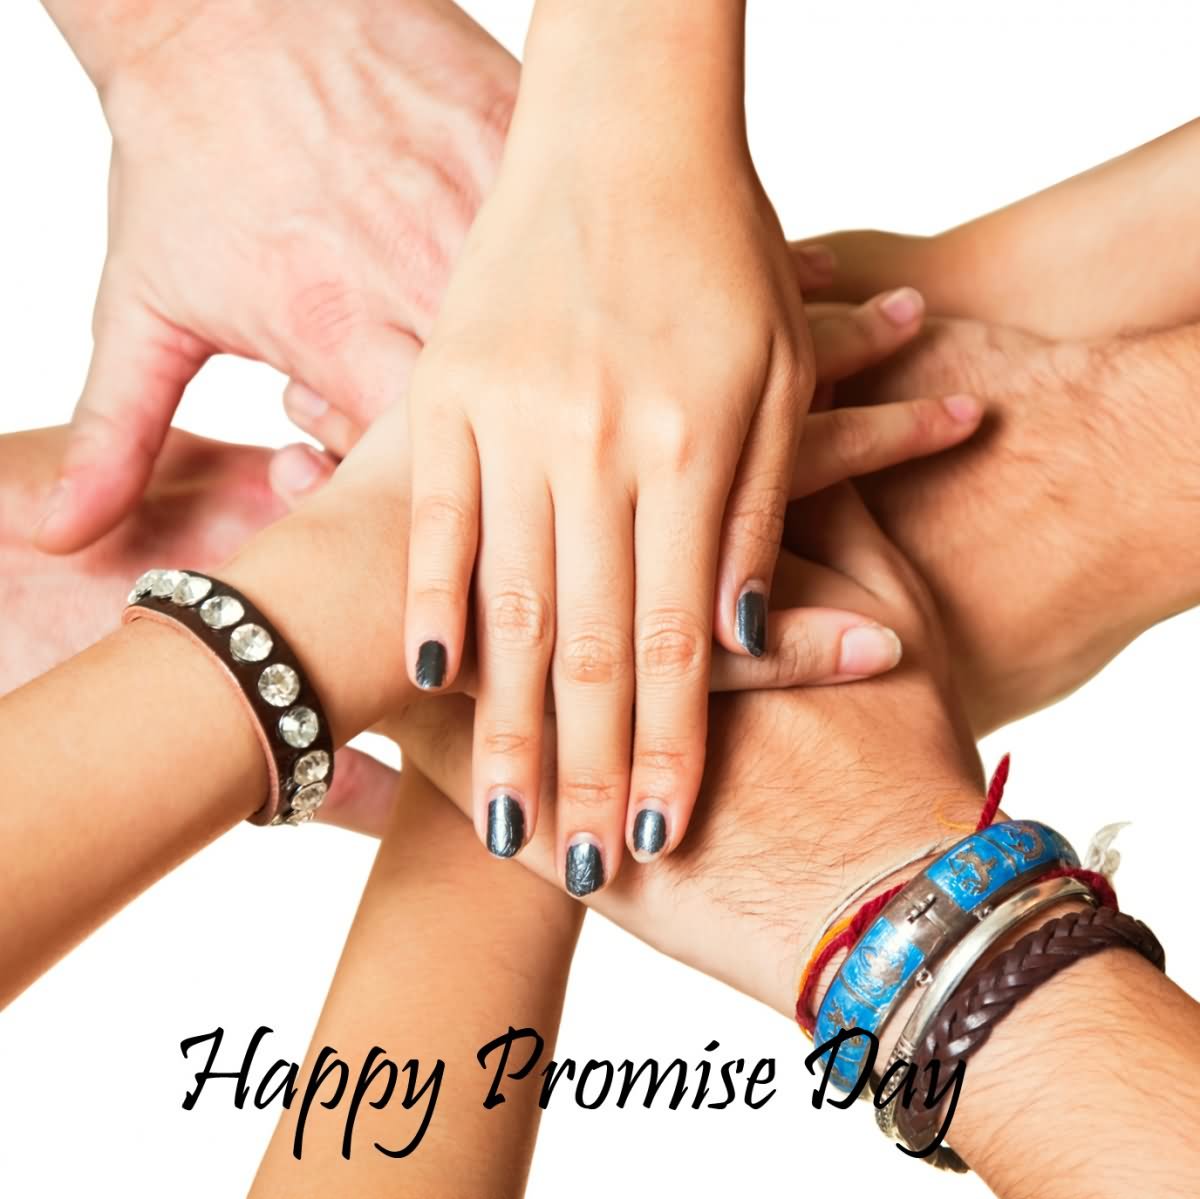 Happy Promise Day Hands Wallpaper - Happy Promise Day 2019 - HD Wallpaper 